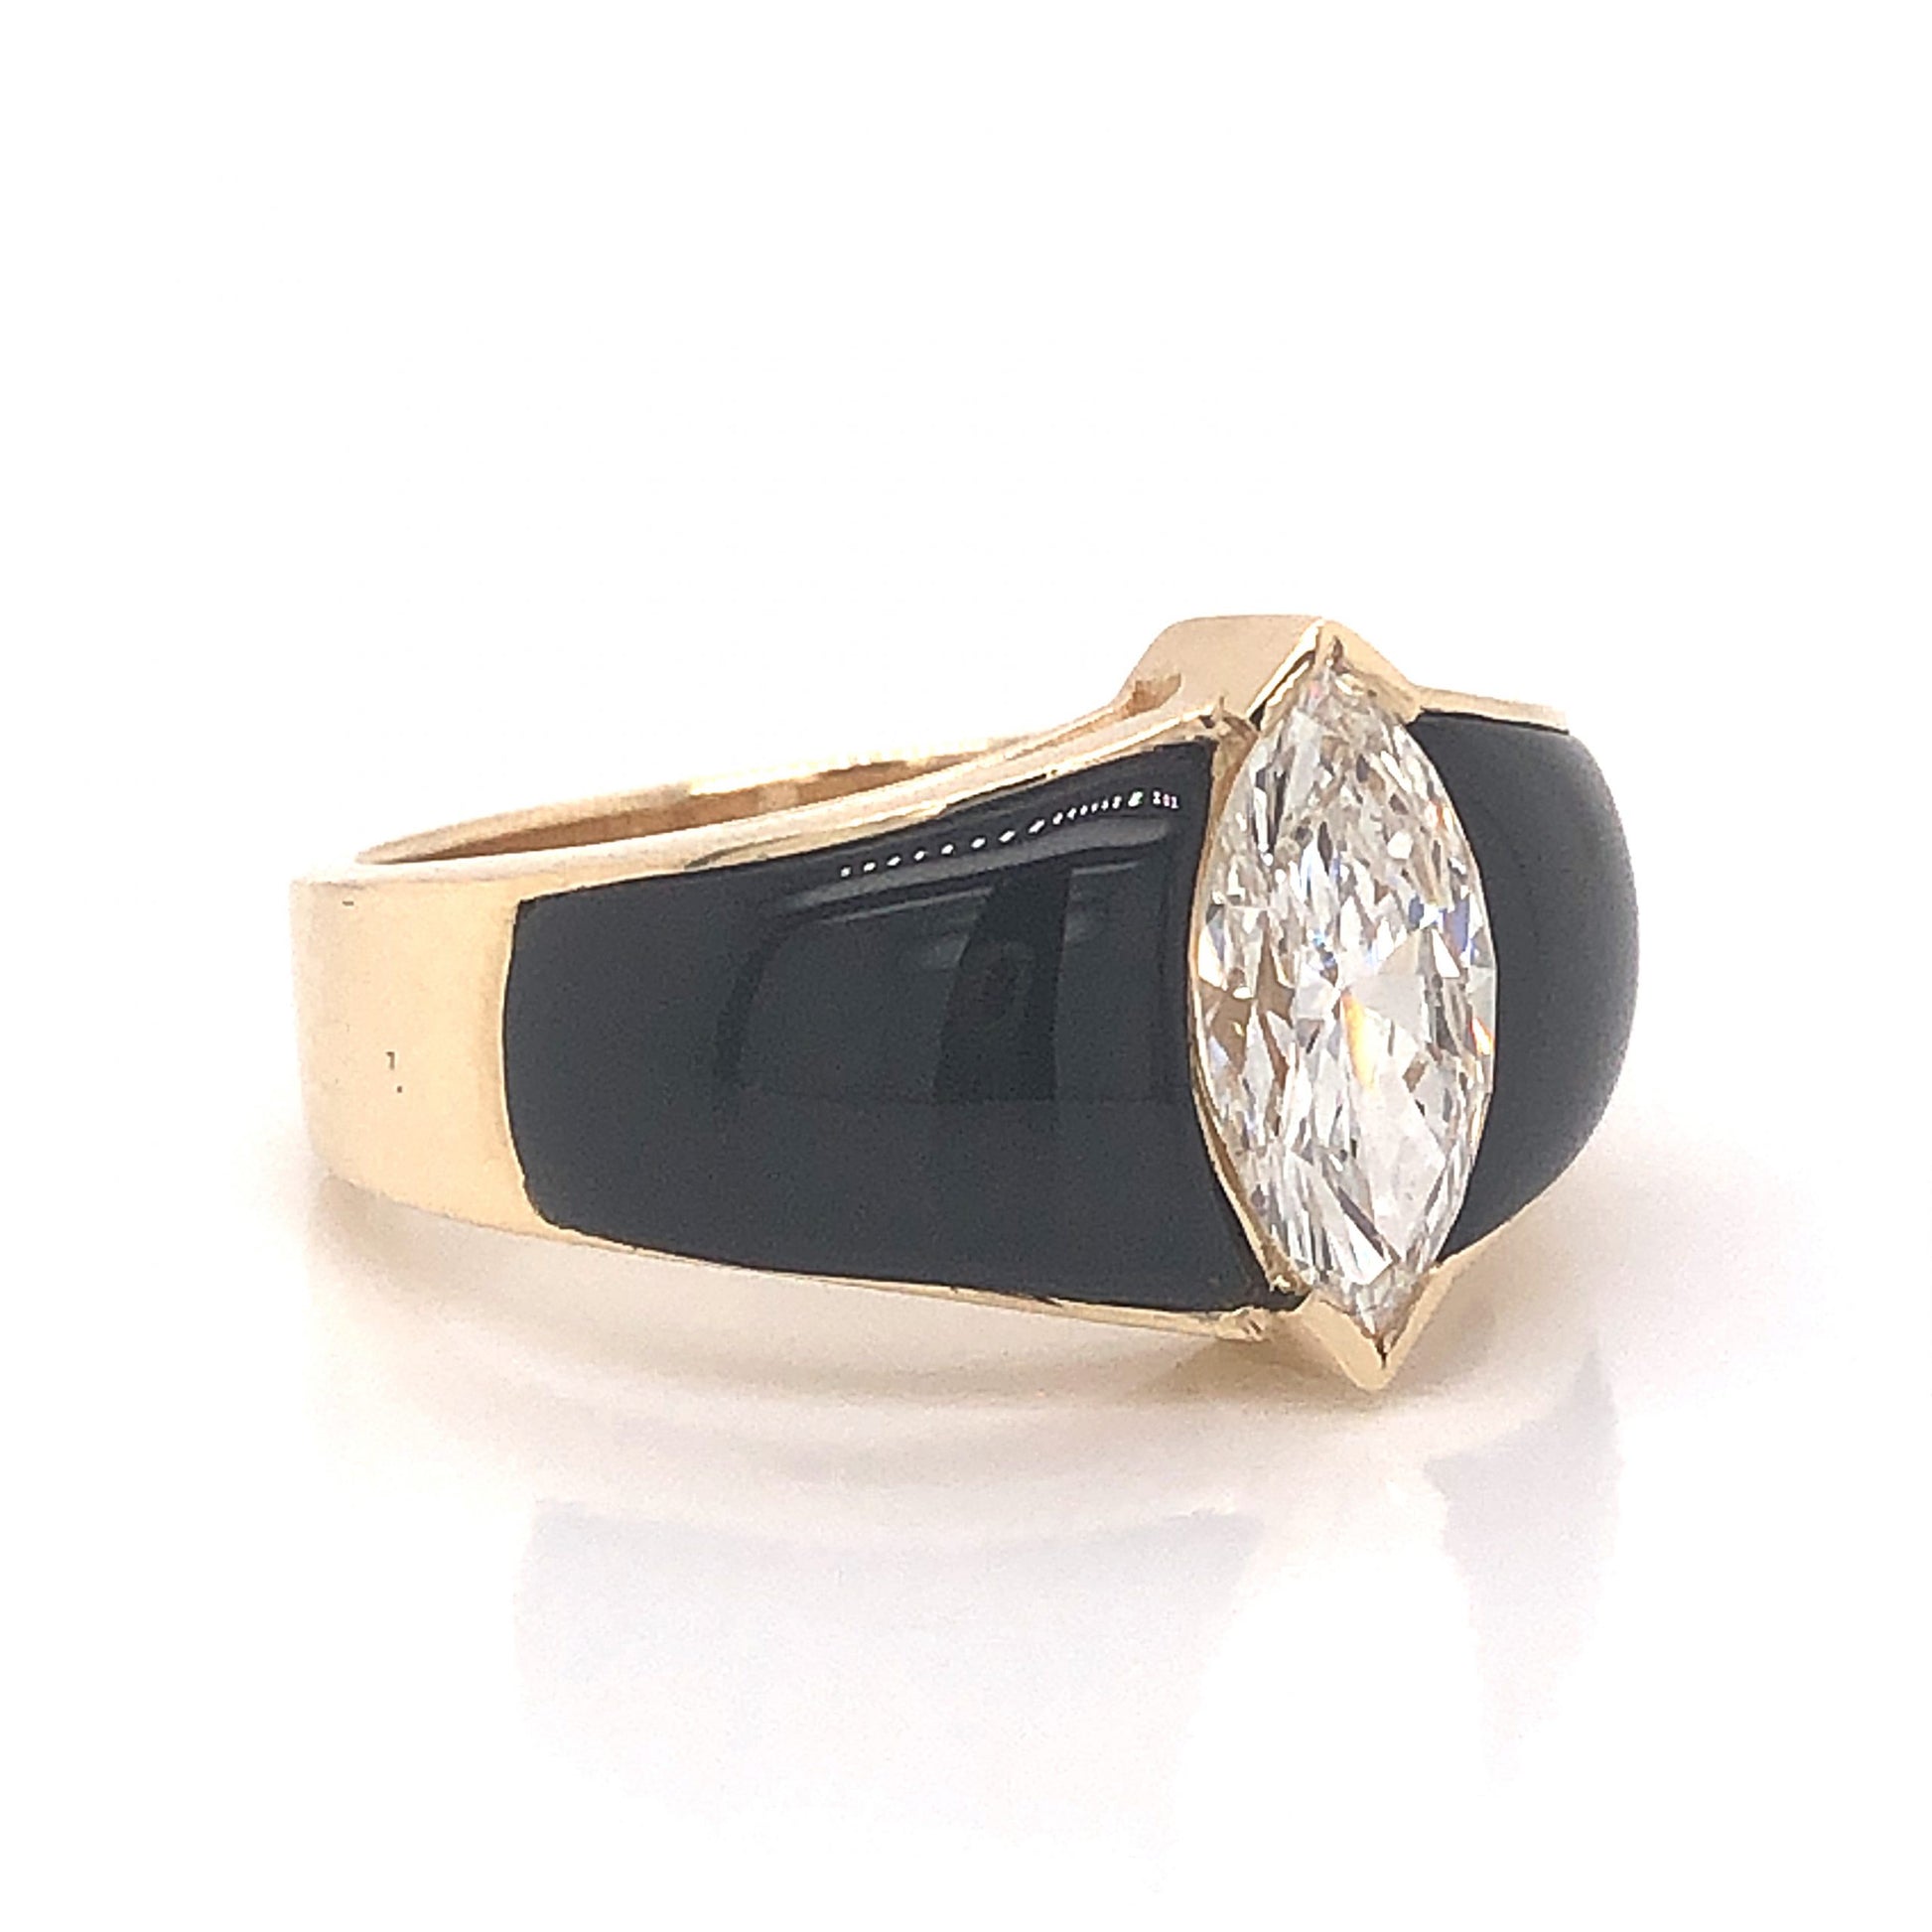 Marquise Diamond & Onyx Cocktail Ring in 14k Yellow Gold